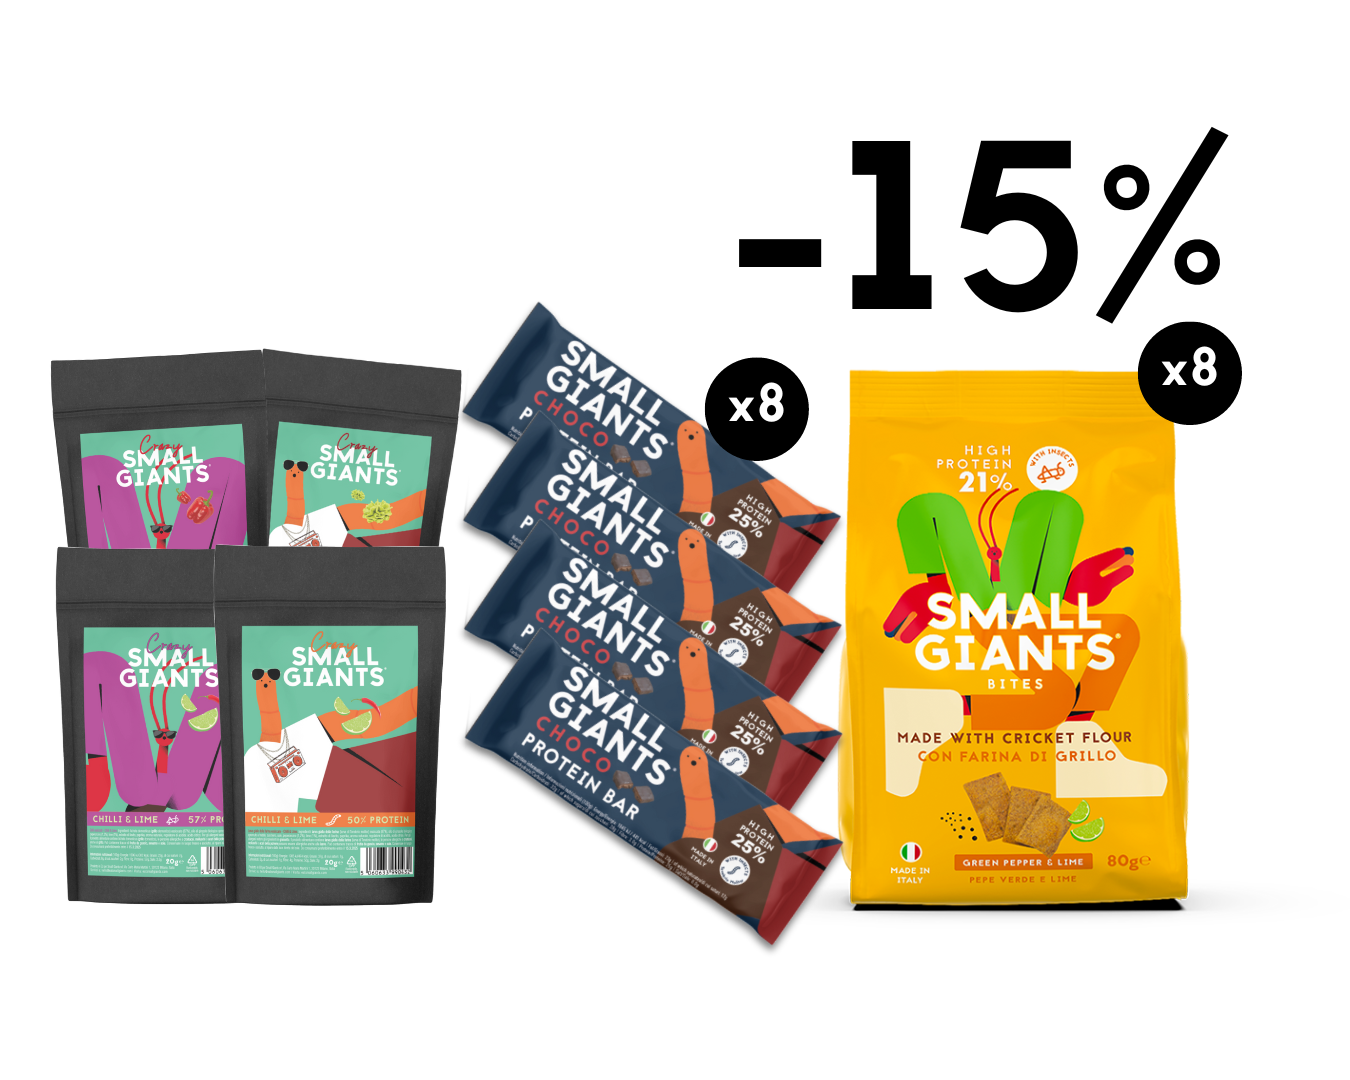 Space Bundle Standard - 20 Insect Products - Limited Edition